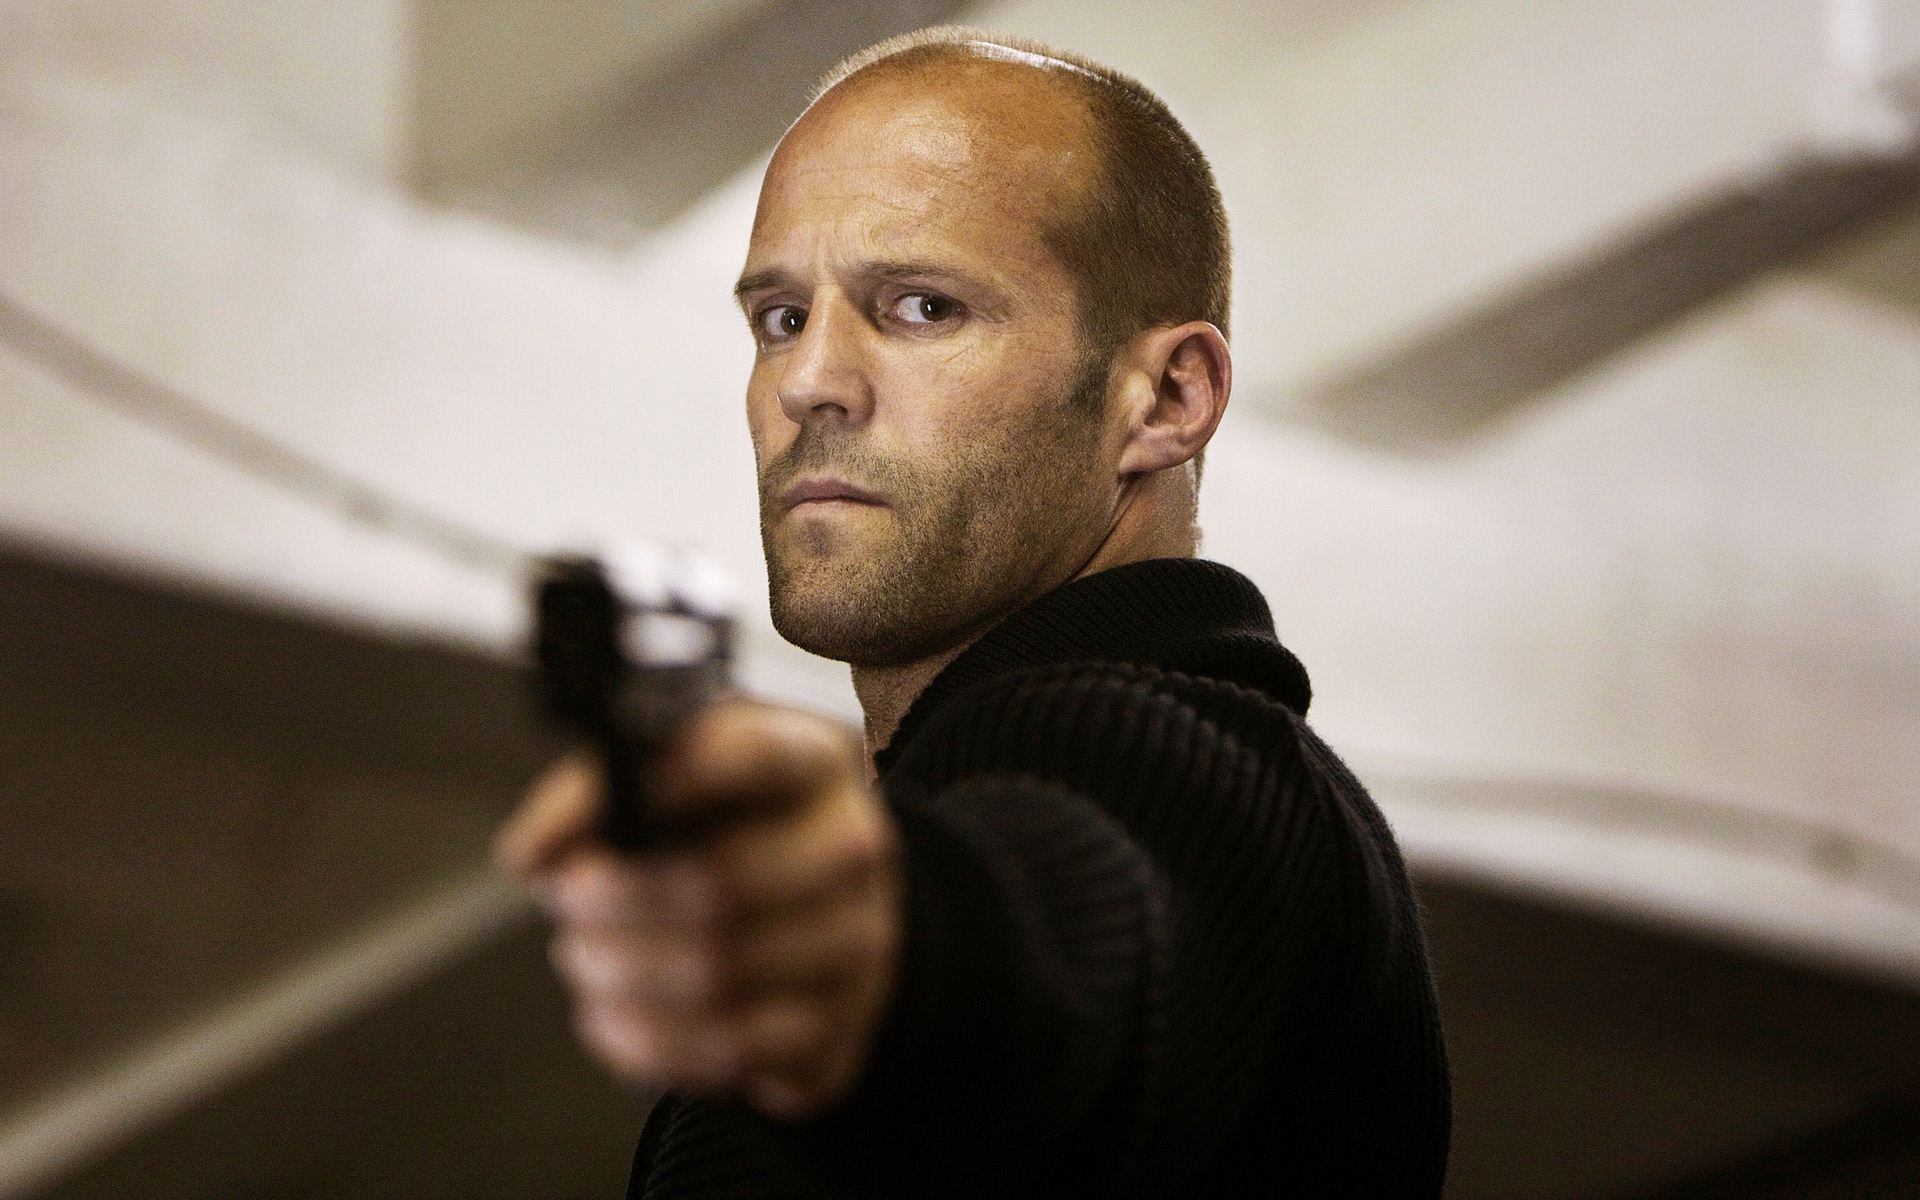 Jason Statham Wallpapers High Resolution and Quality Download